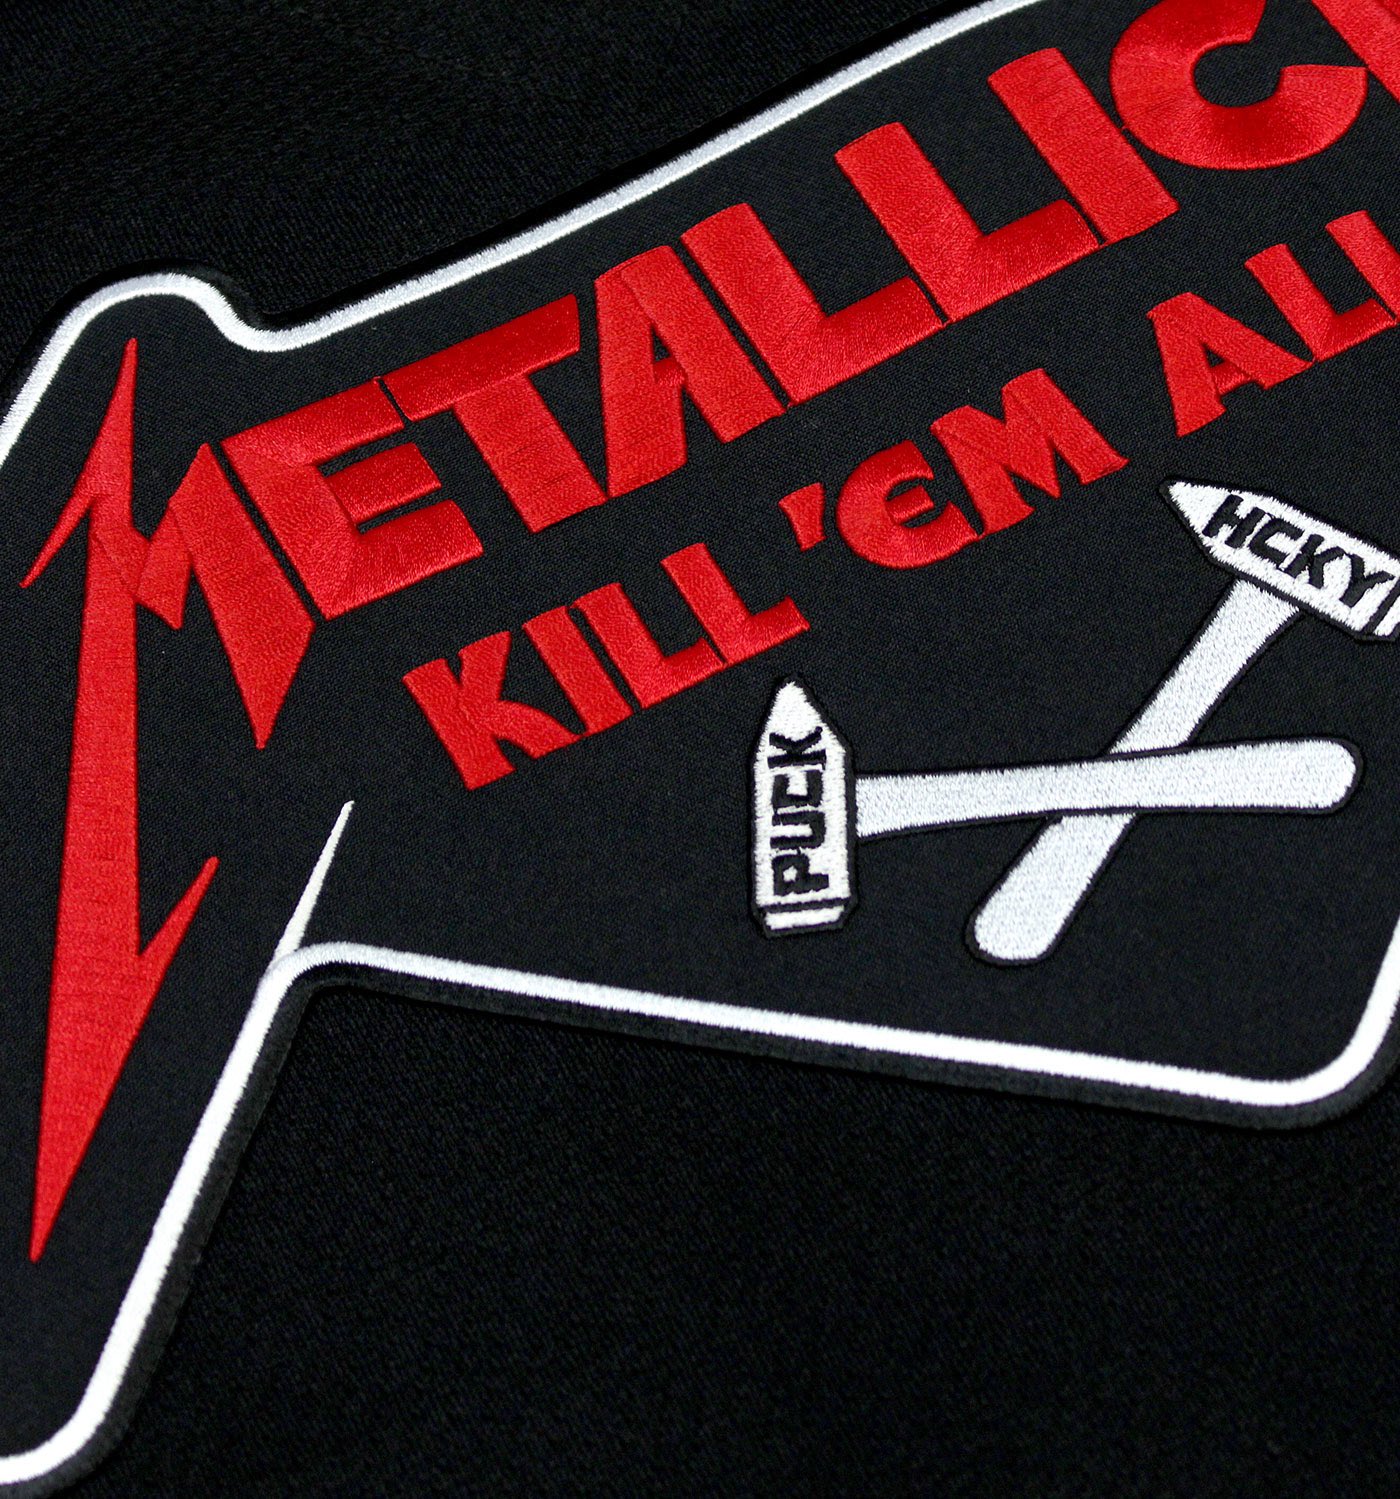 Puck Hcky x Metallica launch their hockey jersey collection – Knotfest